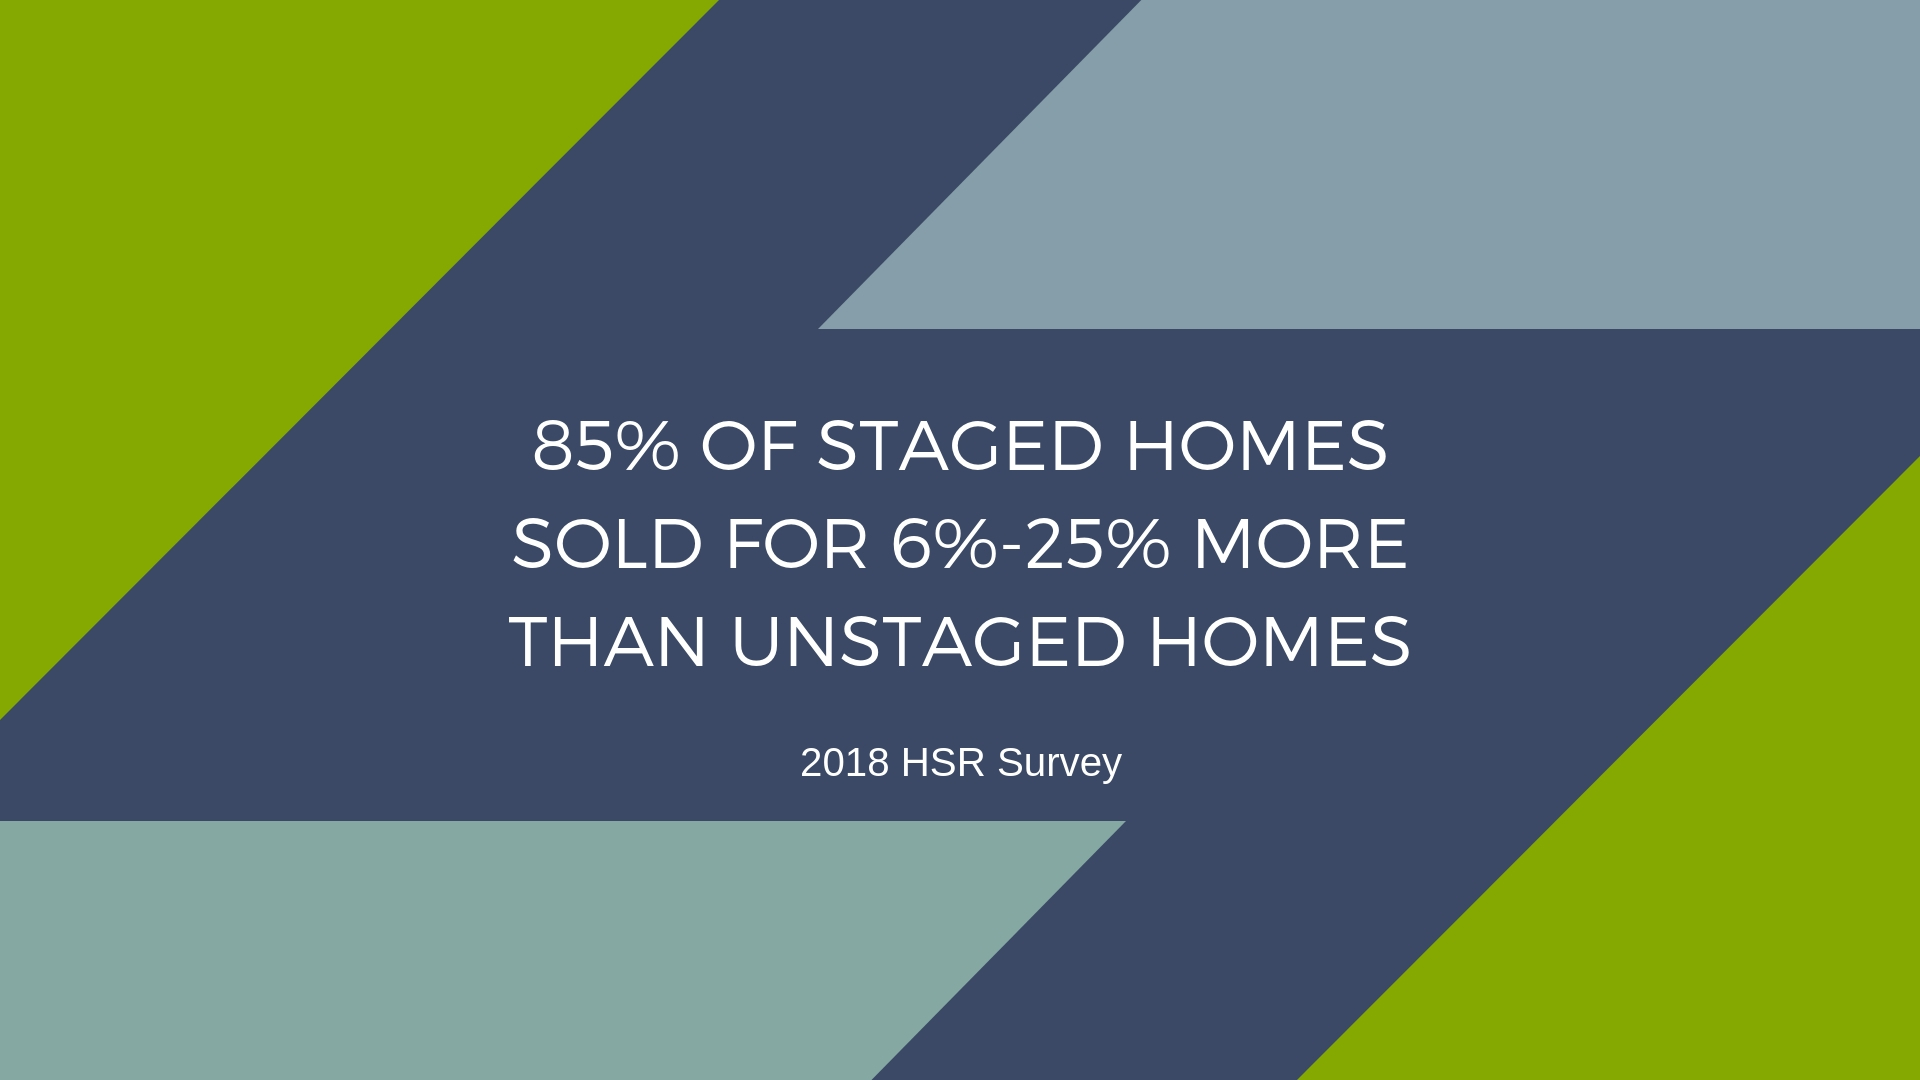 Staging you house will give you a return on your investment